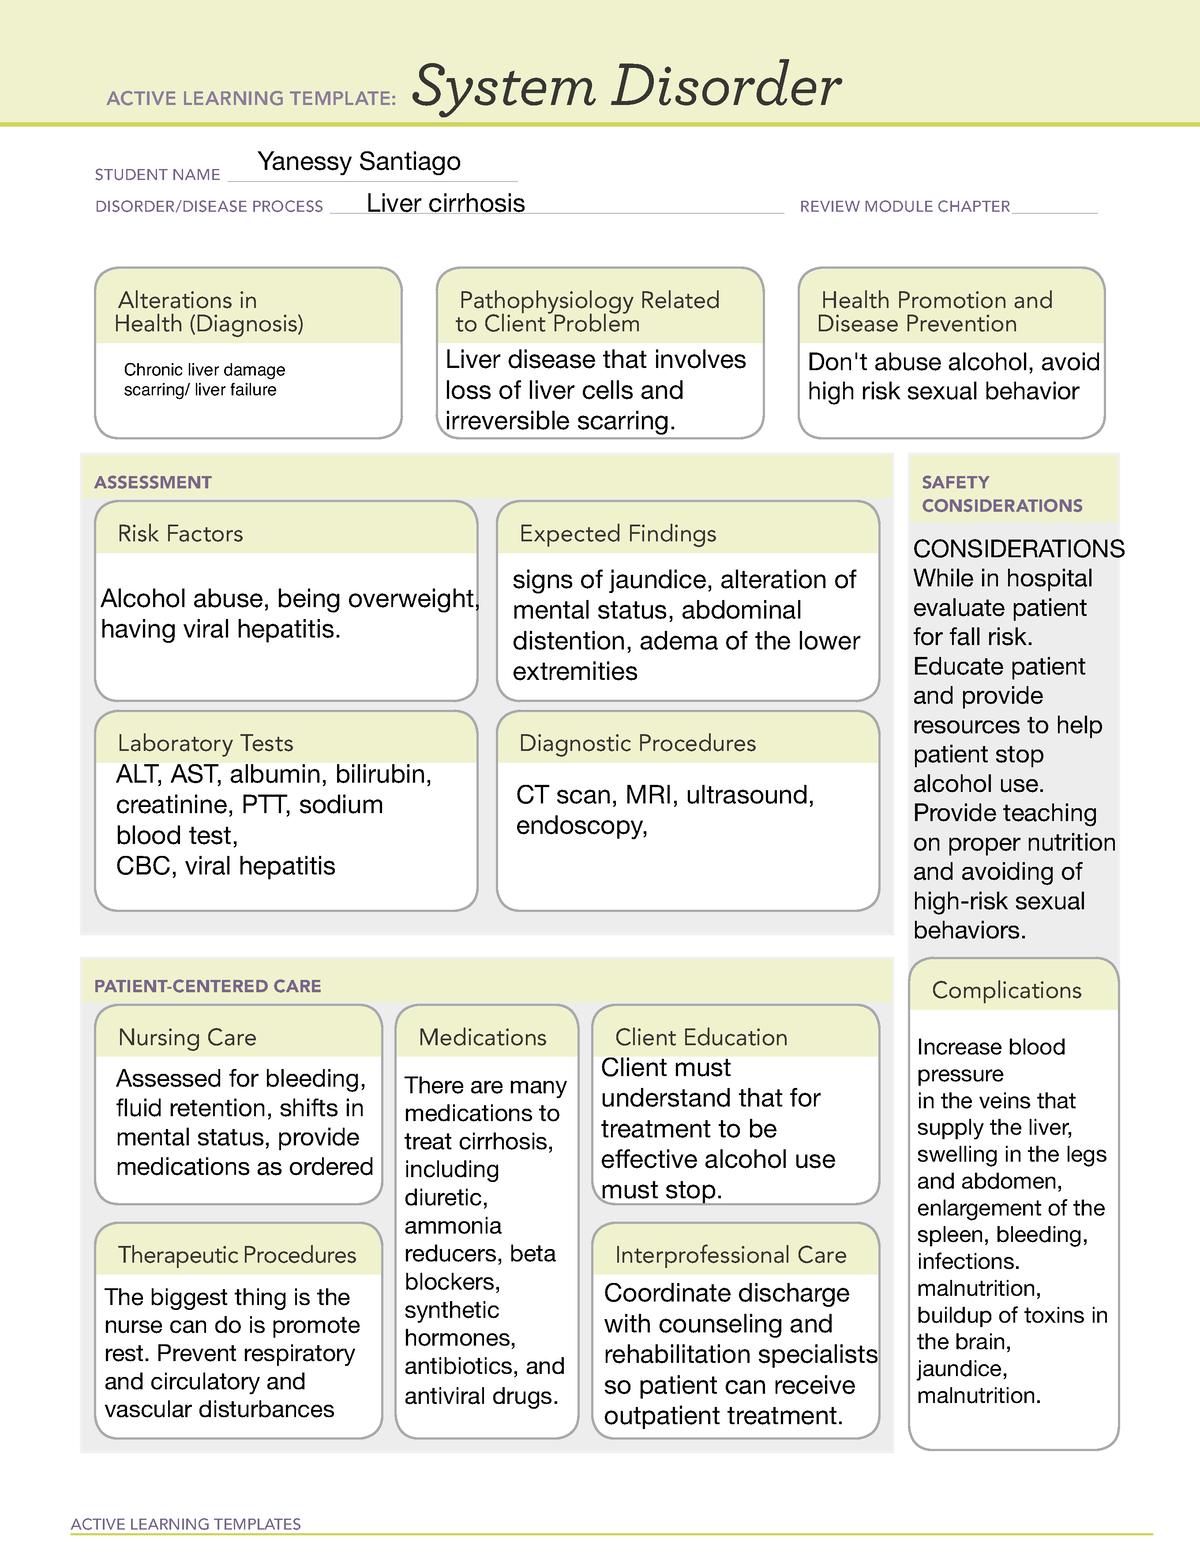 ati-active-learning-template-system-disorder-cirrhosis-active-learning-templates-system